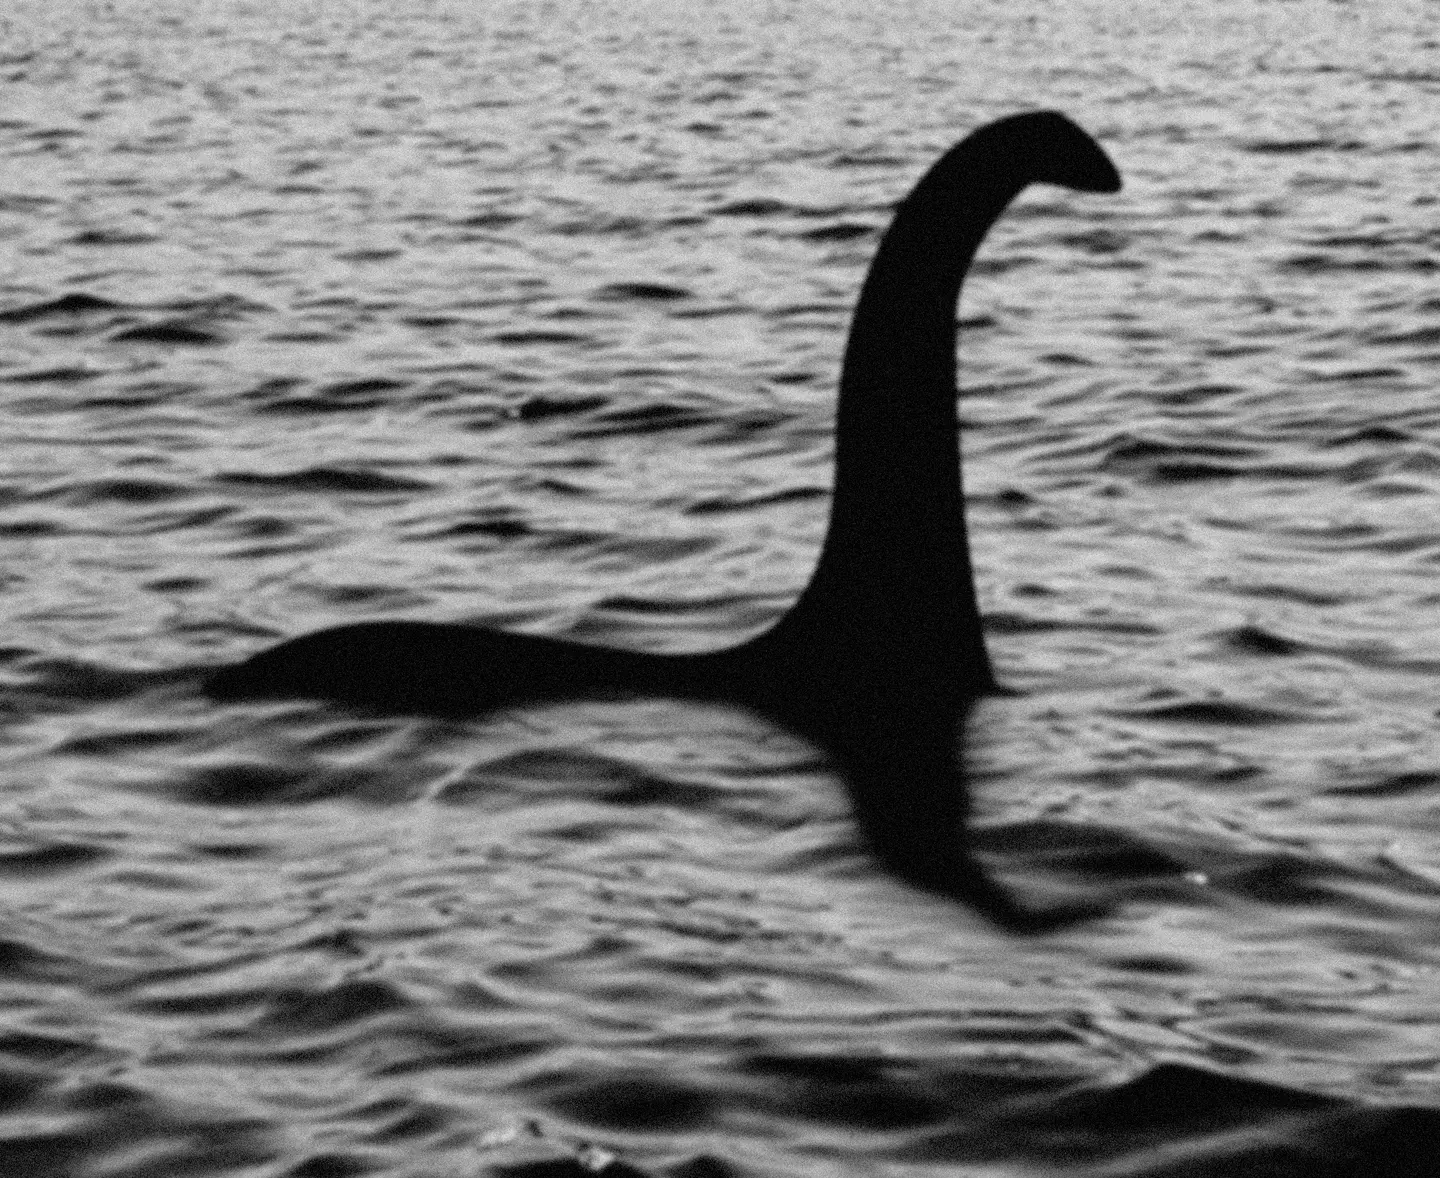 Will they finally find Nessie?